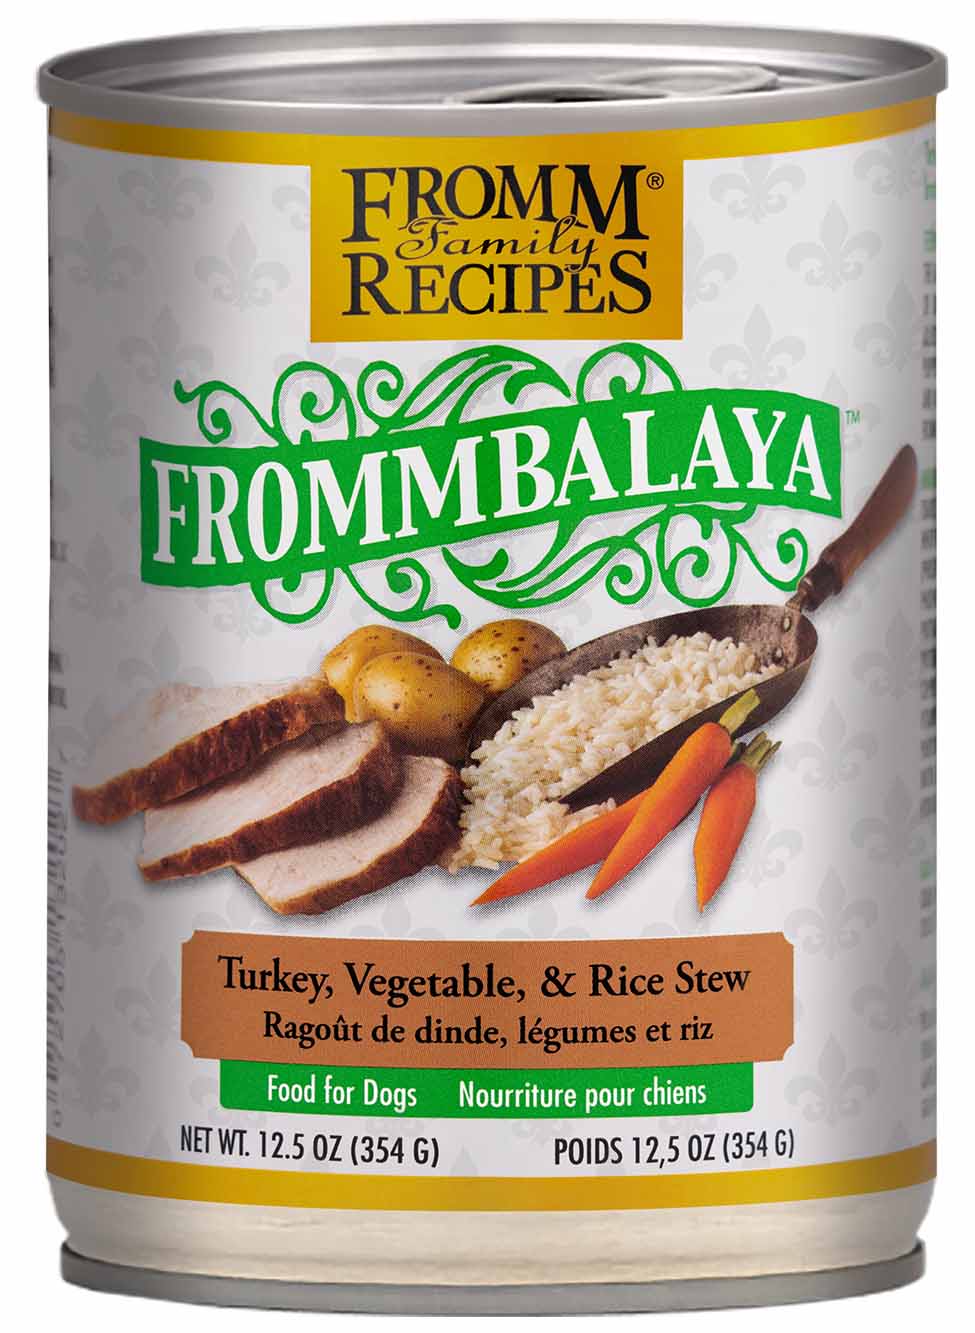 Fromm® Family Recipes Frommbalaya® Turkey, Vegetable & Rice Stew